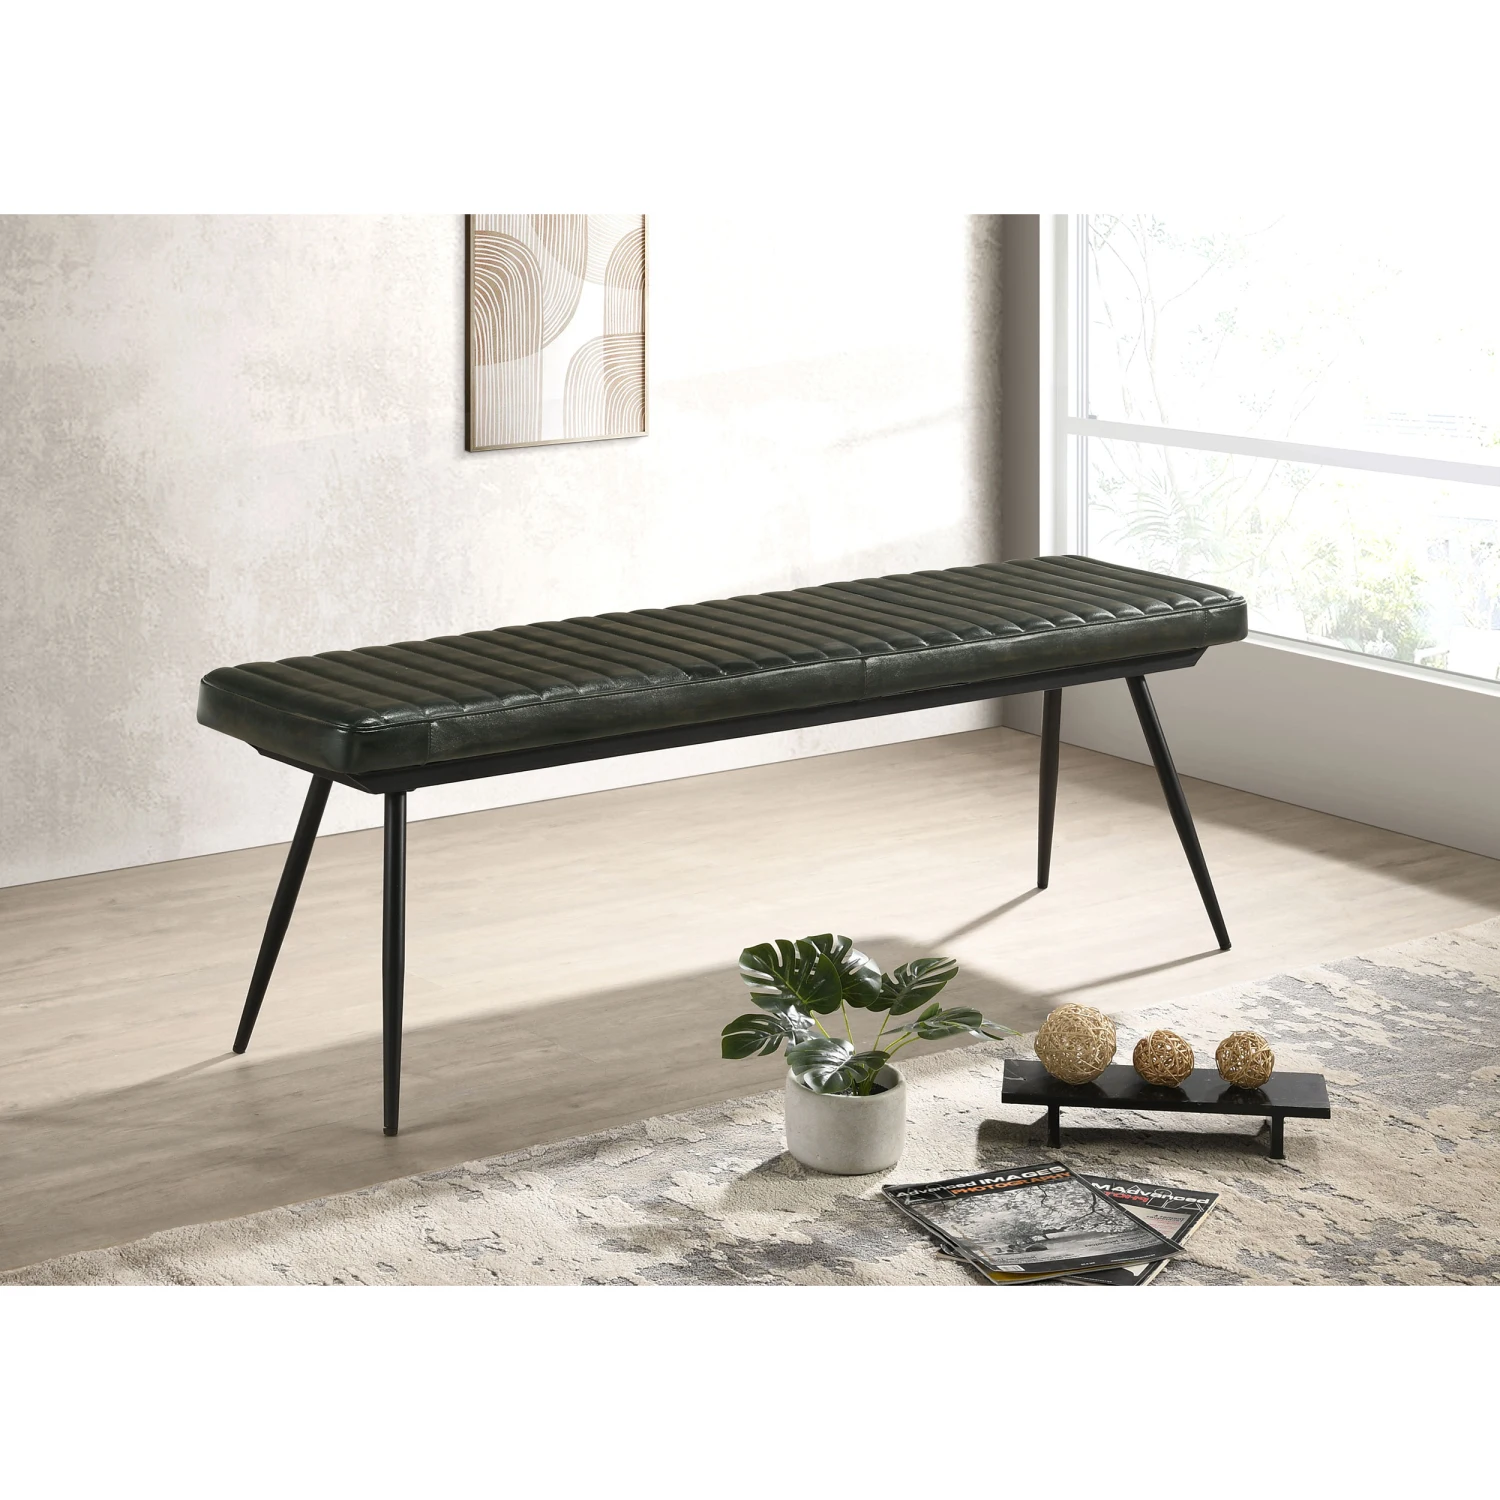 

Black Tufted Cushion Side Bench with Elegant Espresso Finish, Stylish and Comfortable Seating for Any Room in Your Home makeup